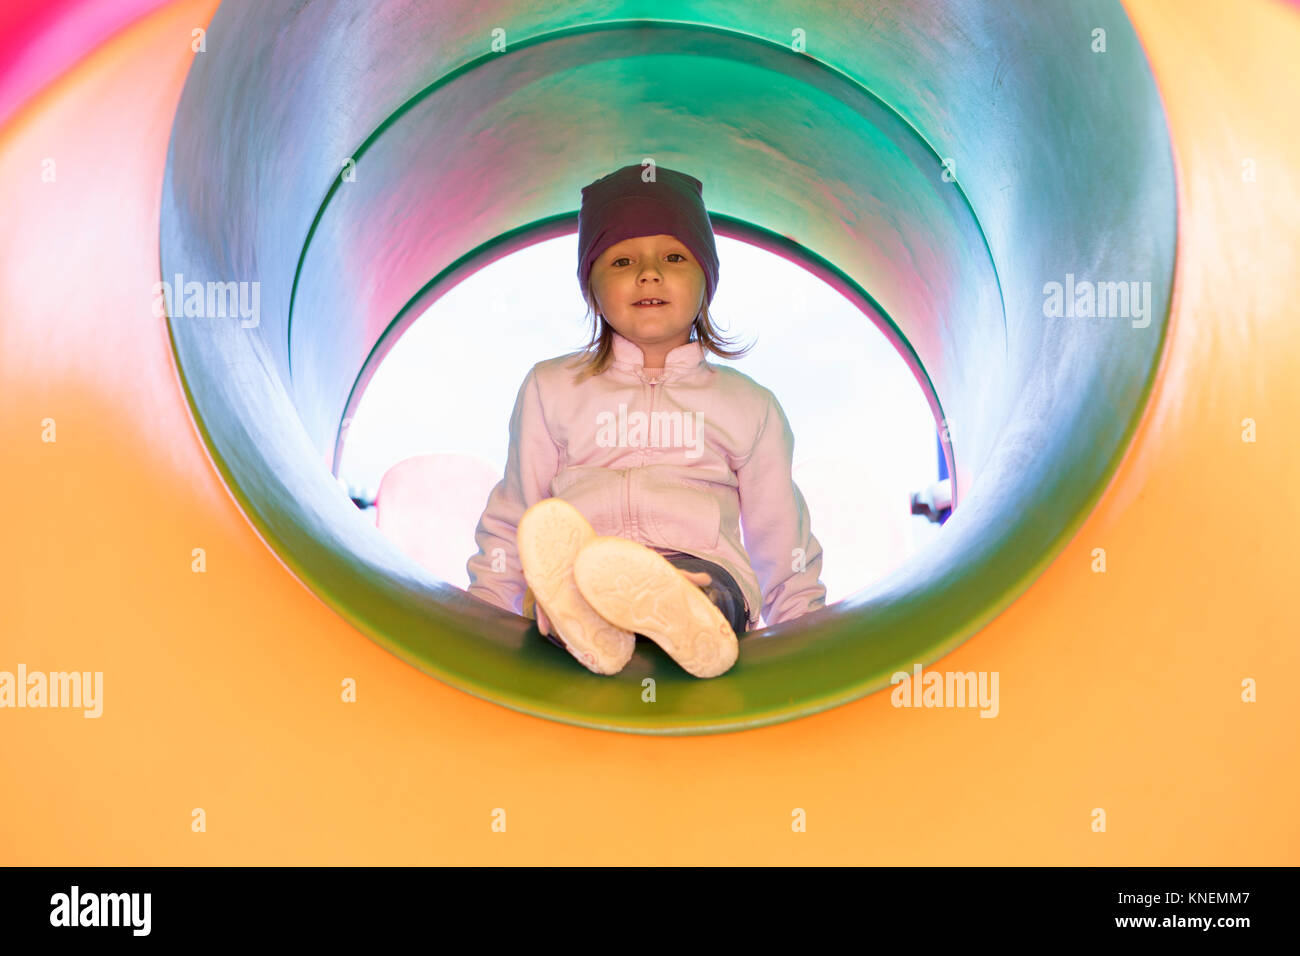 Girl in tube on climbing frame looking at camera smiling Stock Photo